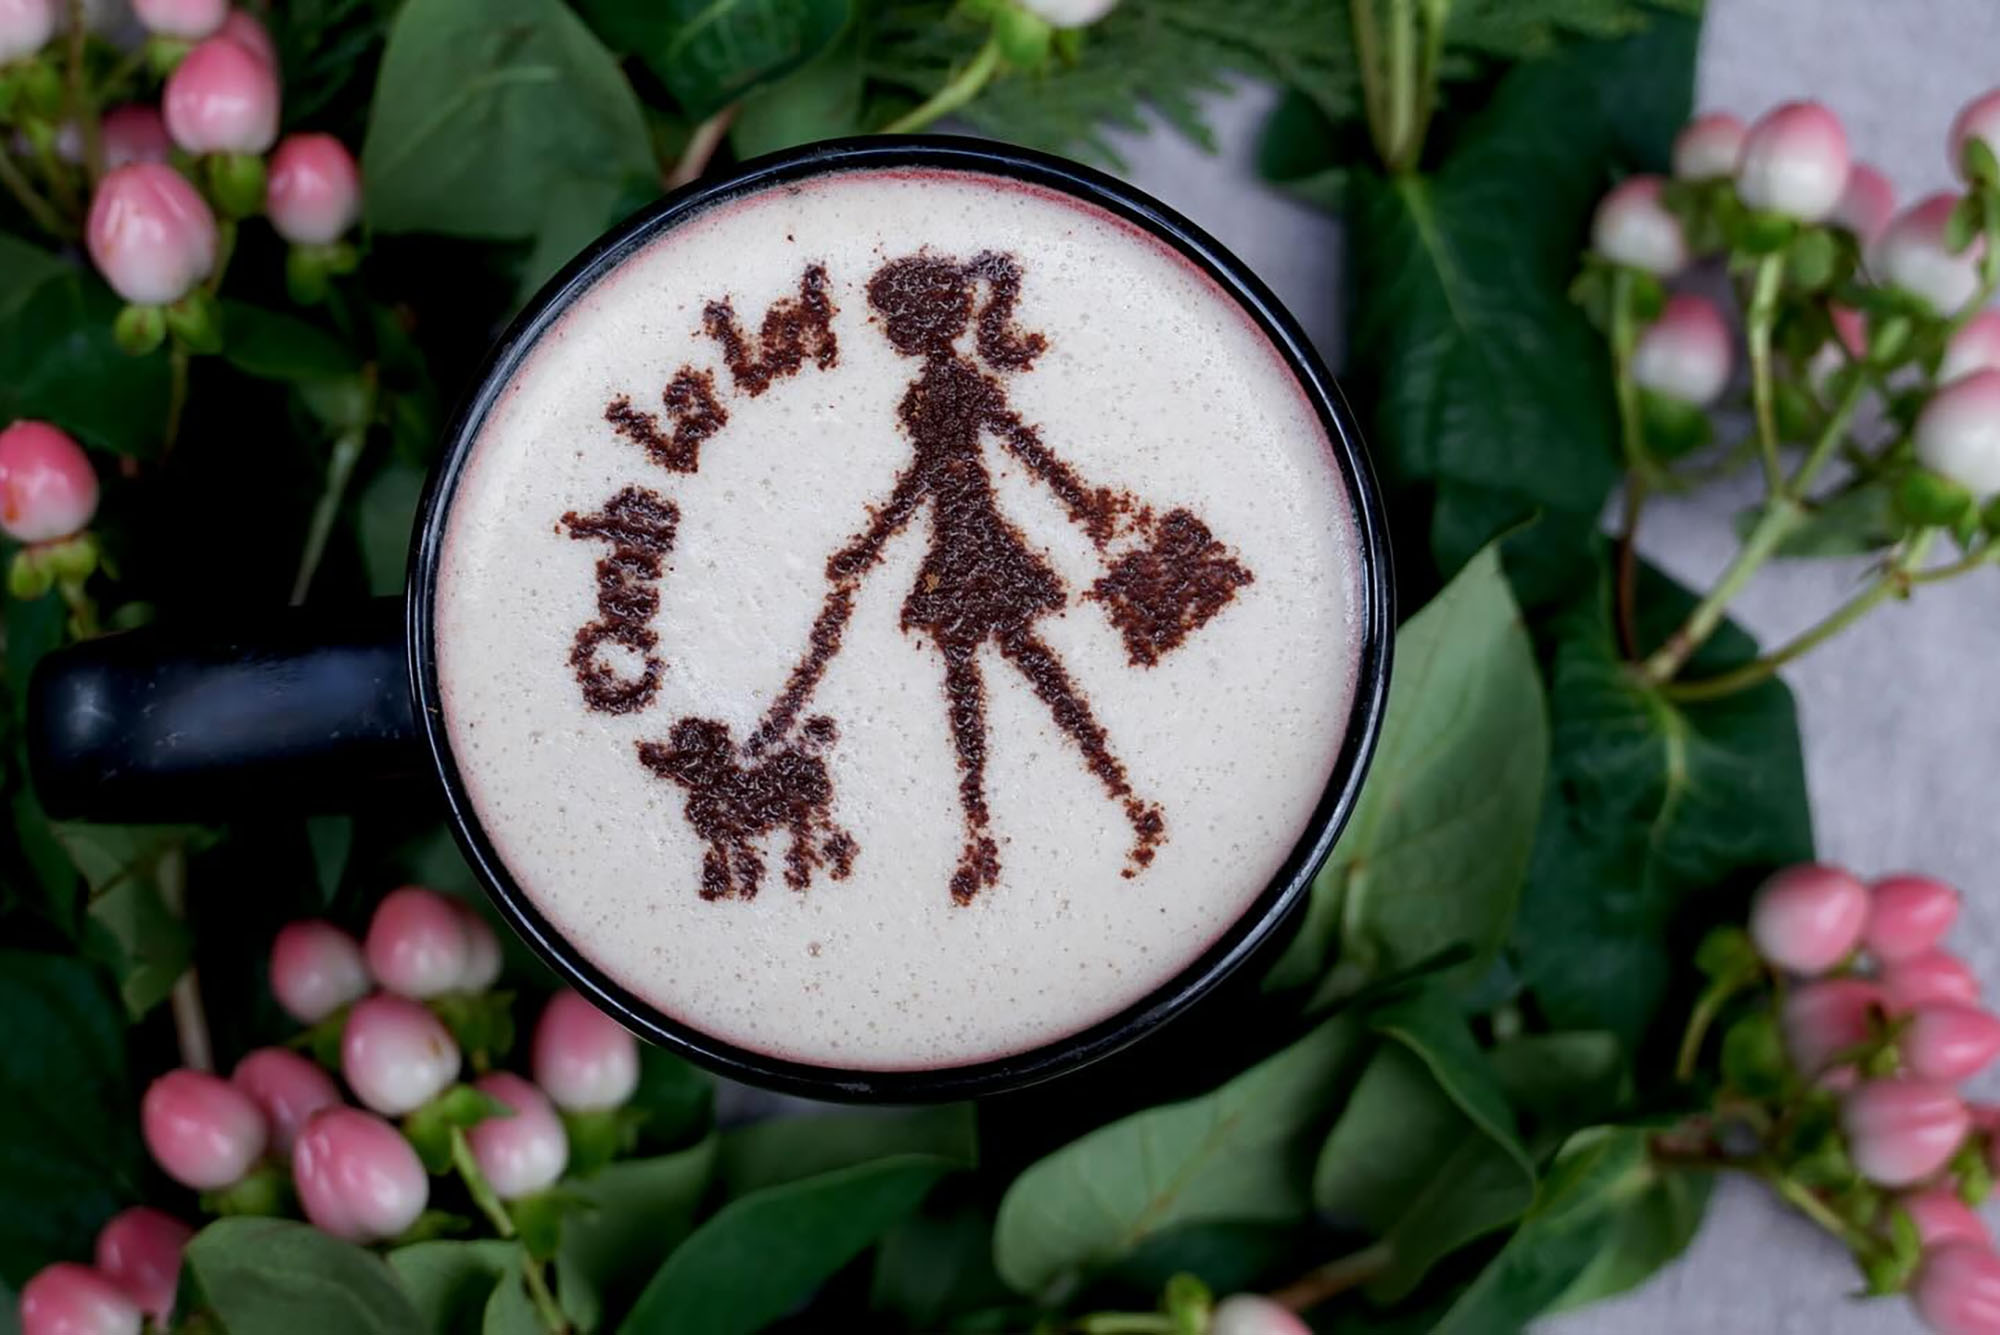 Photo: A cup of coffee with a design in the foam that looks like a woman walking a dog with the text "Ooh La La" above their head